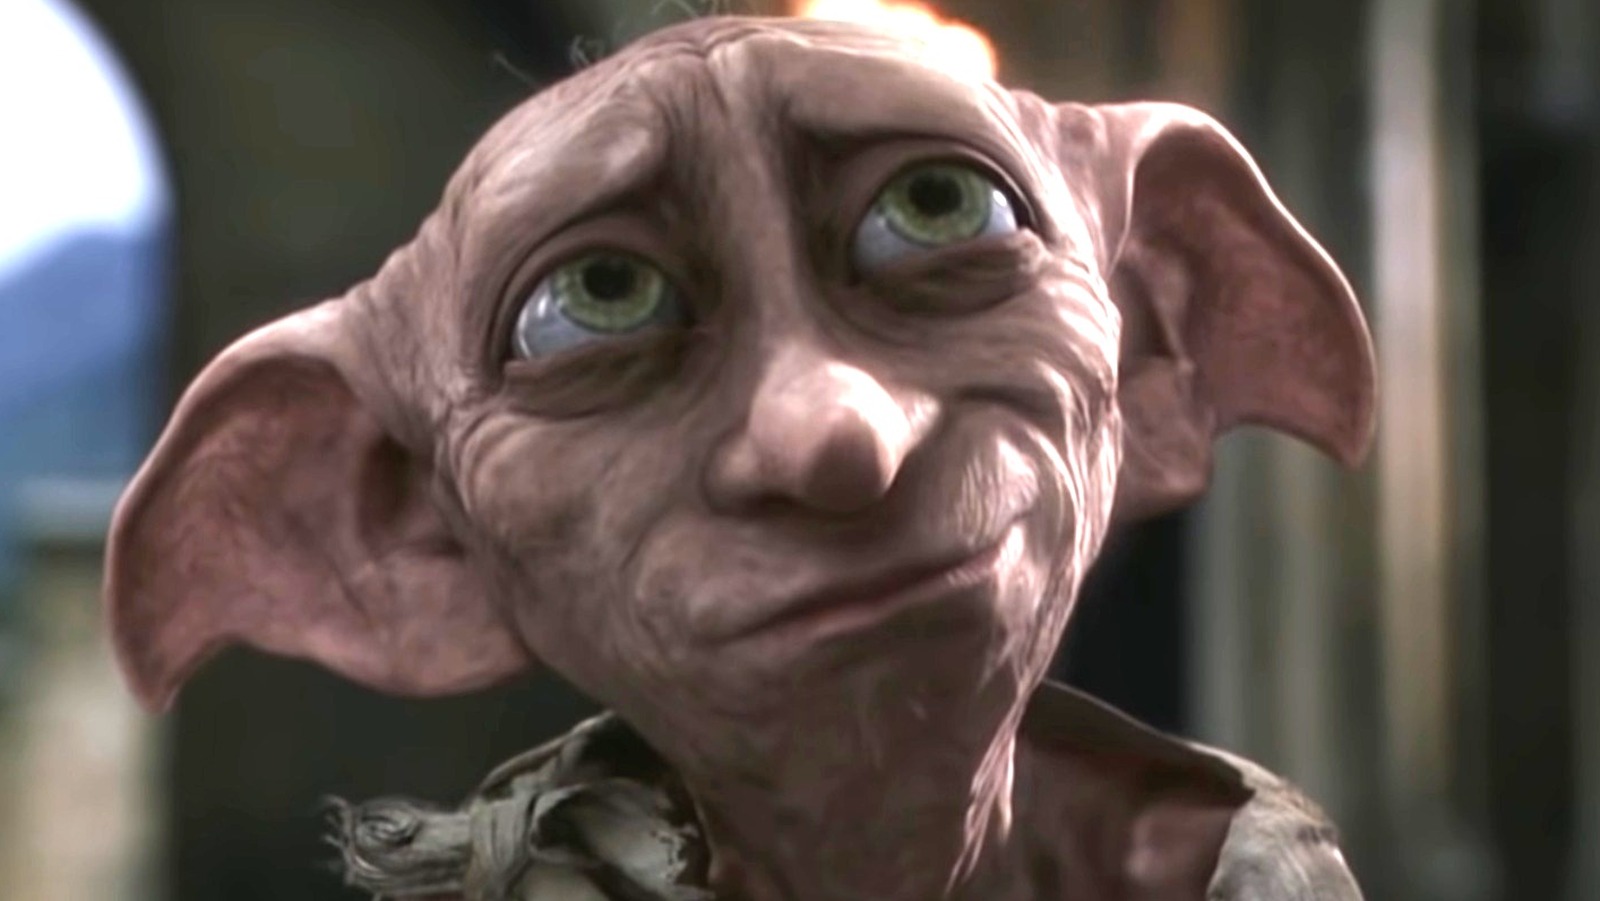 Harry Potter Fans Can't Stop Joking About The Creepy Dobby